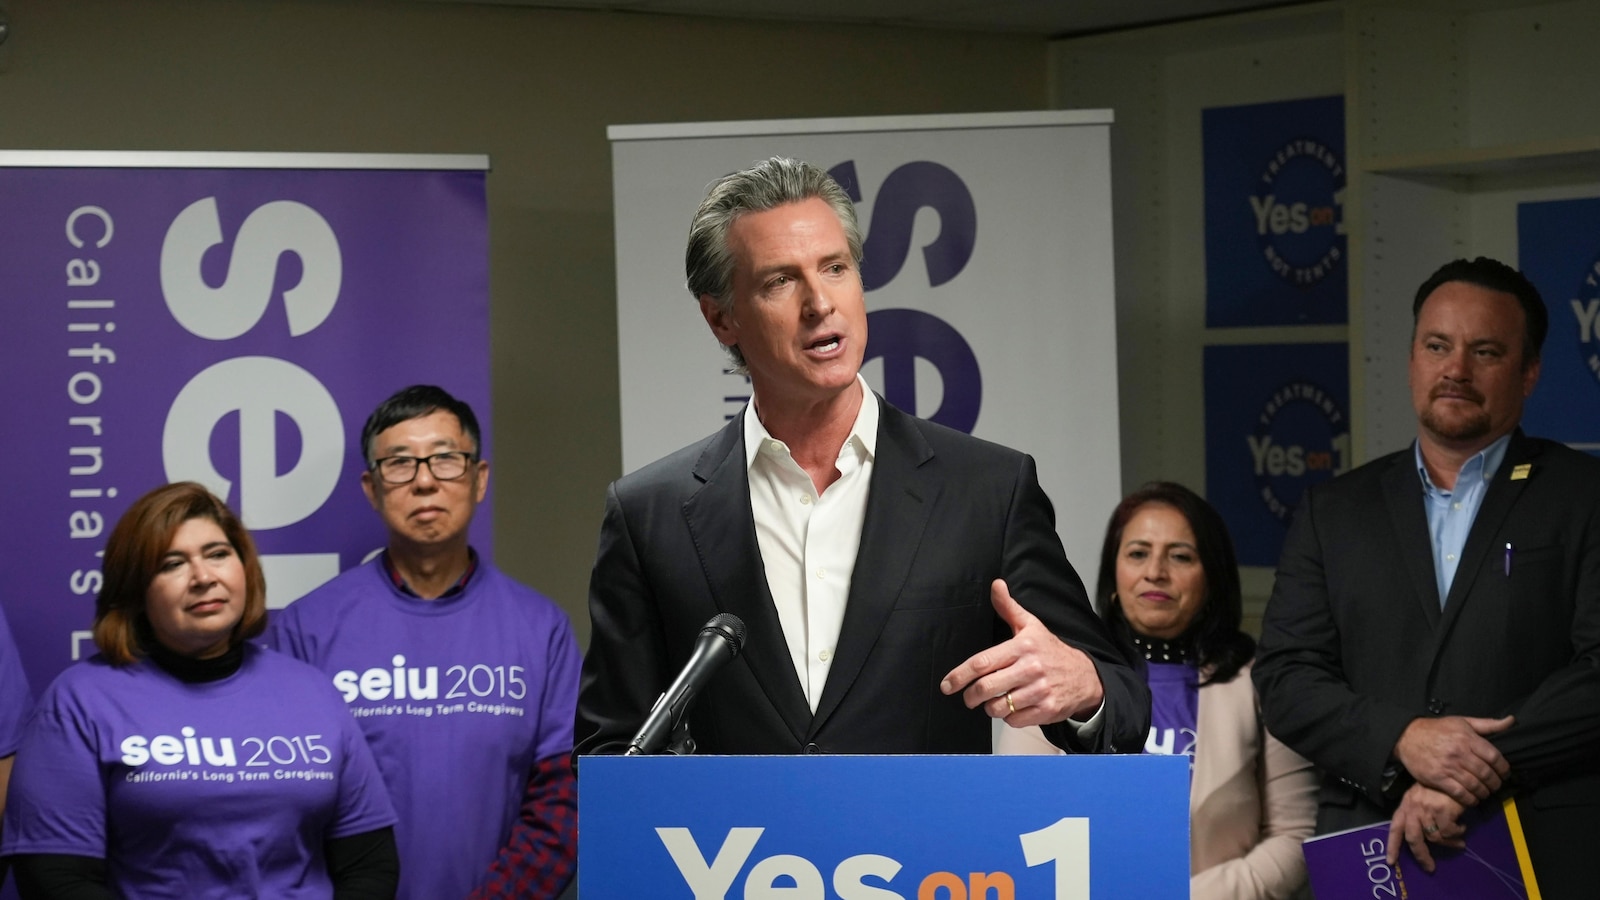 California Governor seeks support from voters to address homelessness crisis